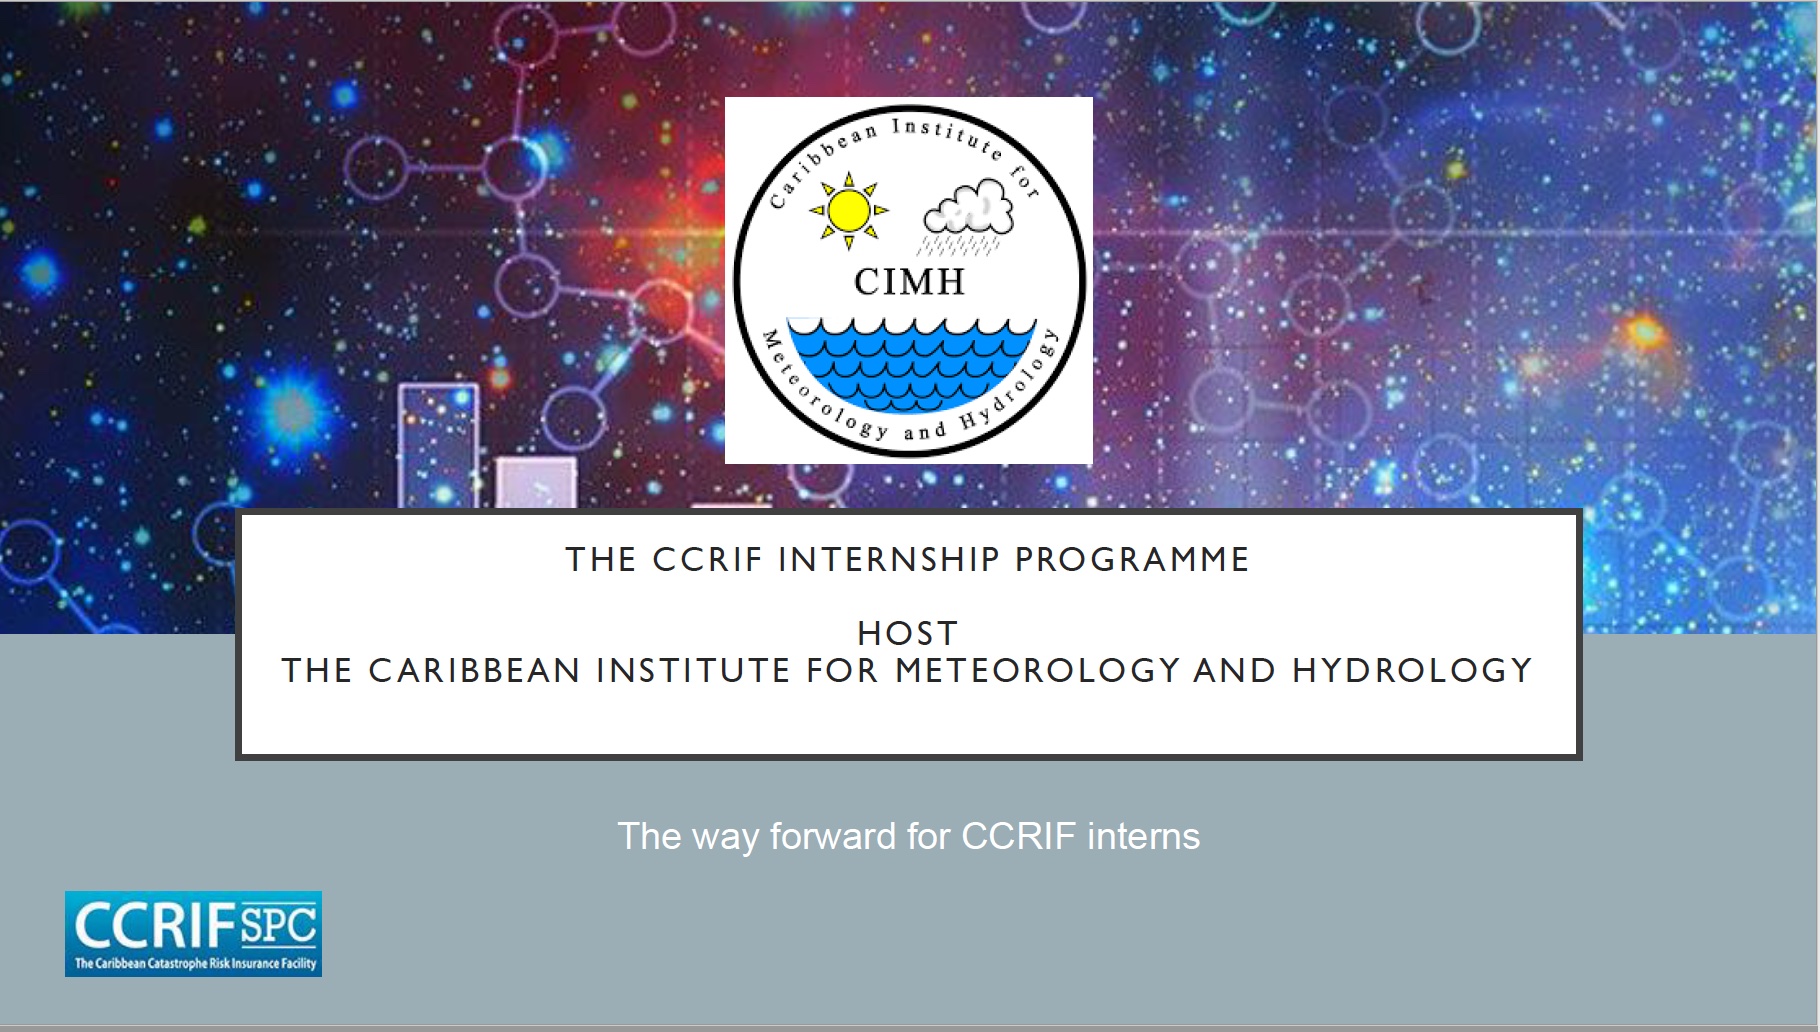 Refections of Host - CIMH - The Way Forwards for CCRIF Interns